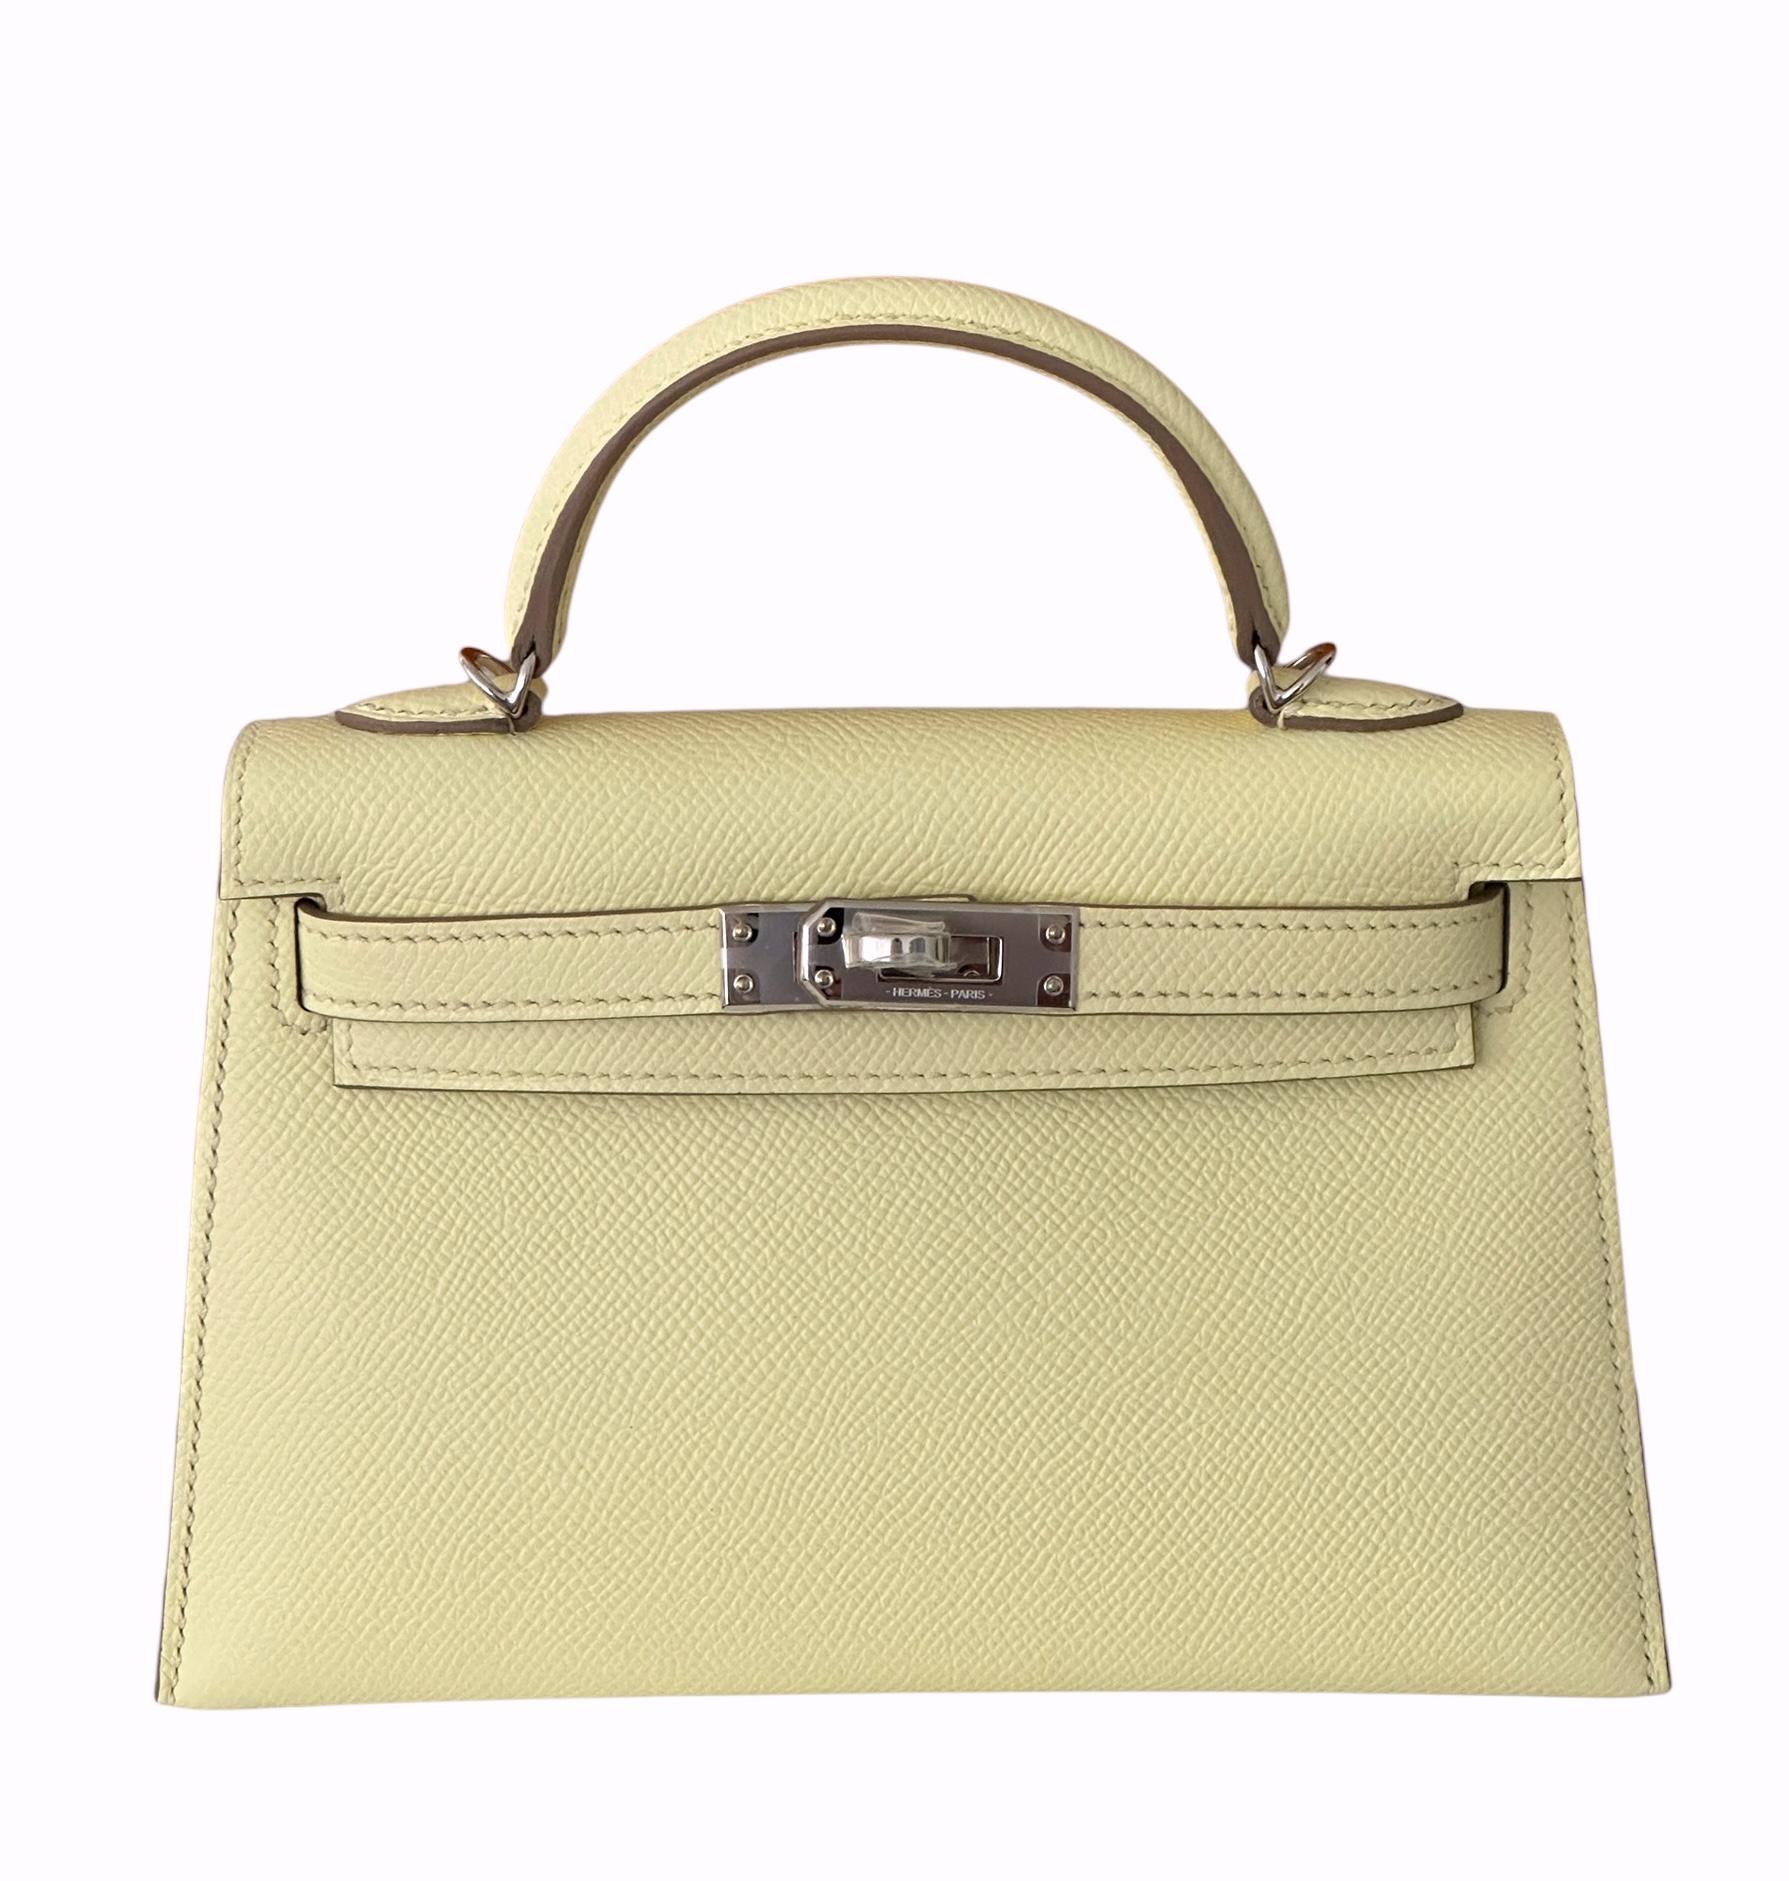 Hermes
Called the Mini Kelly
20cm 
Just arrived from the Hermes Boutique
This Kelly, in the Sellier style, is in the brand new color Jaune Milton, a pastel yellow epsom leather with palladium hardware and has tonal stitching, two straps with front